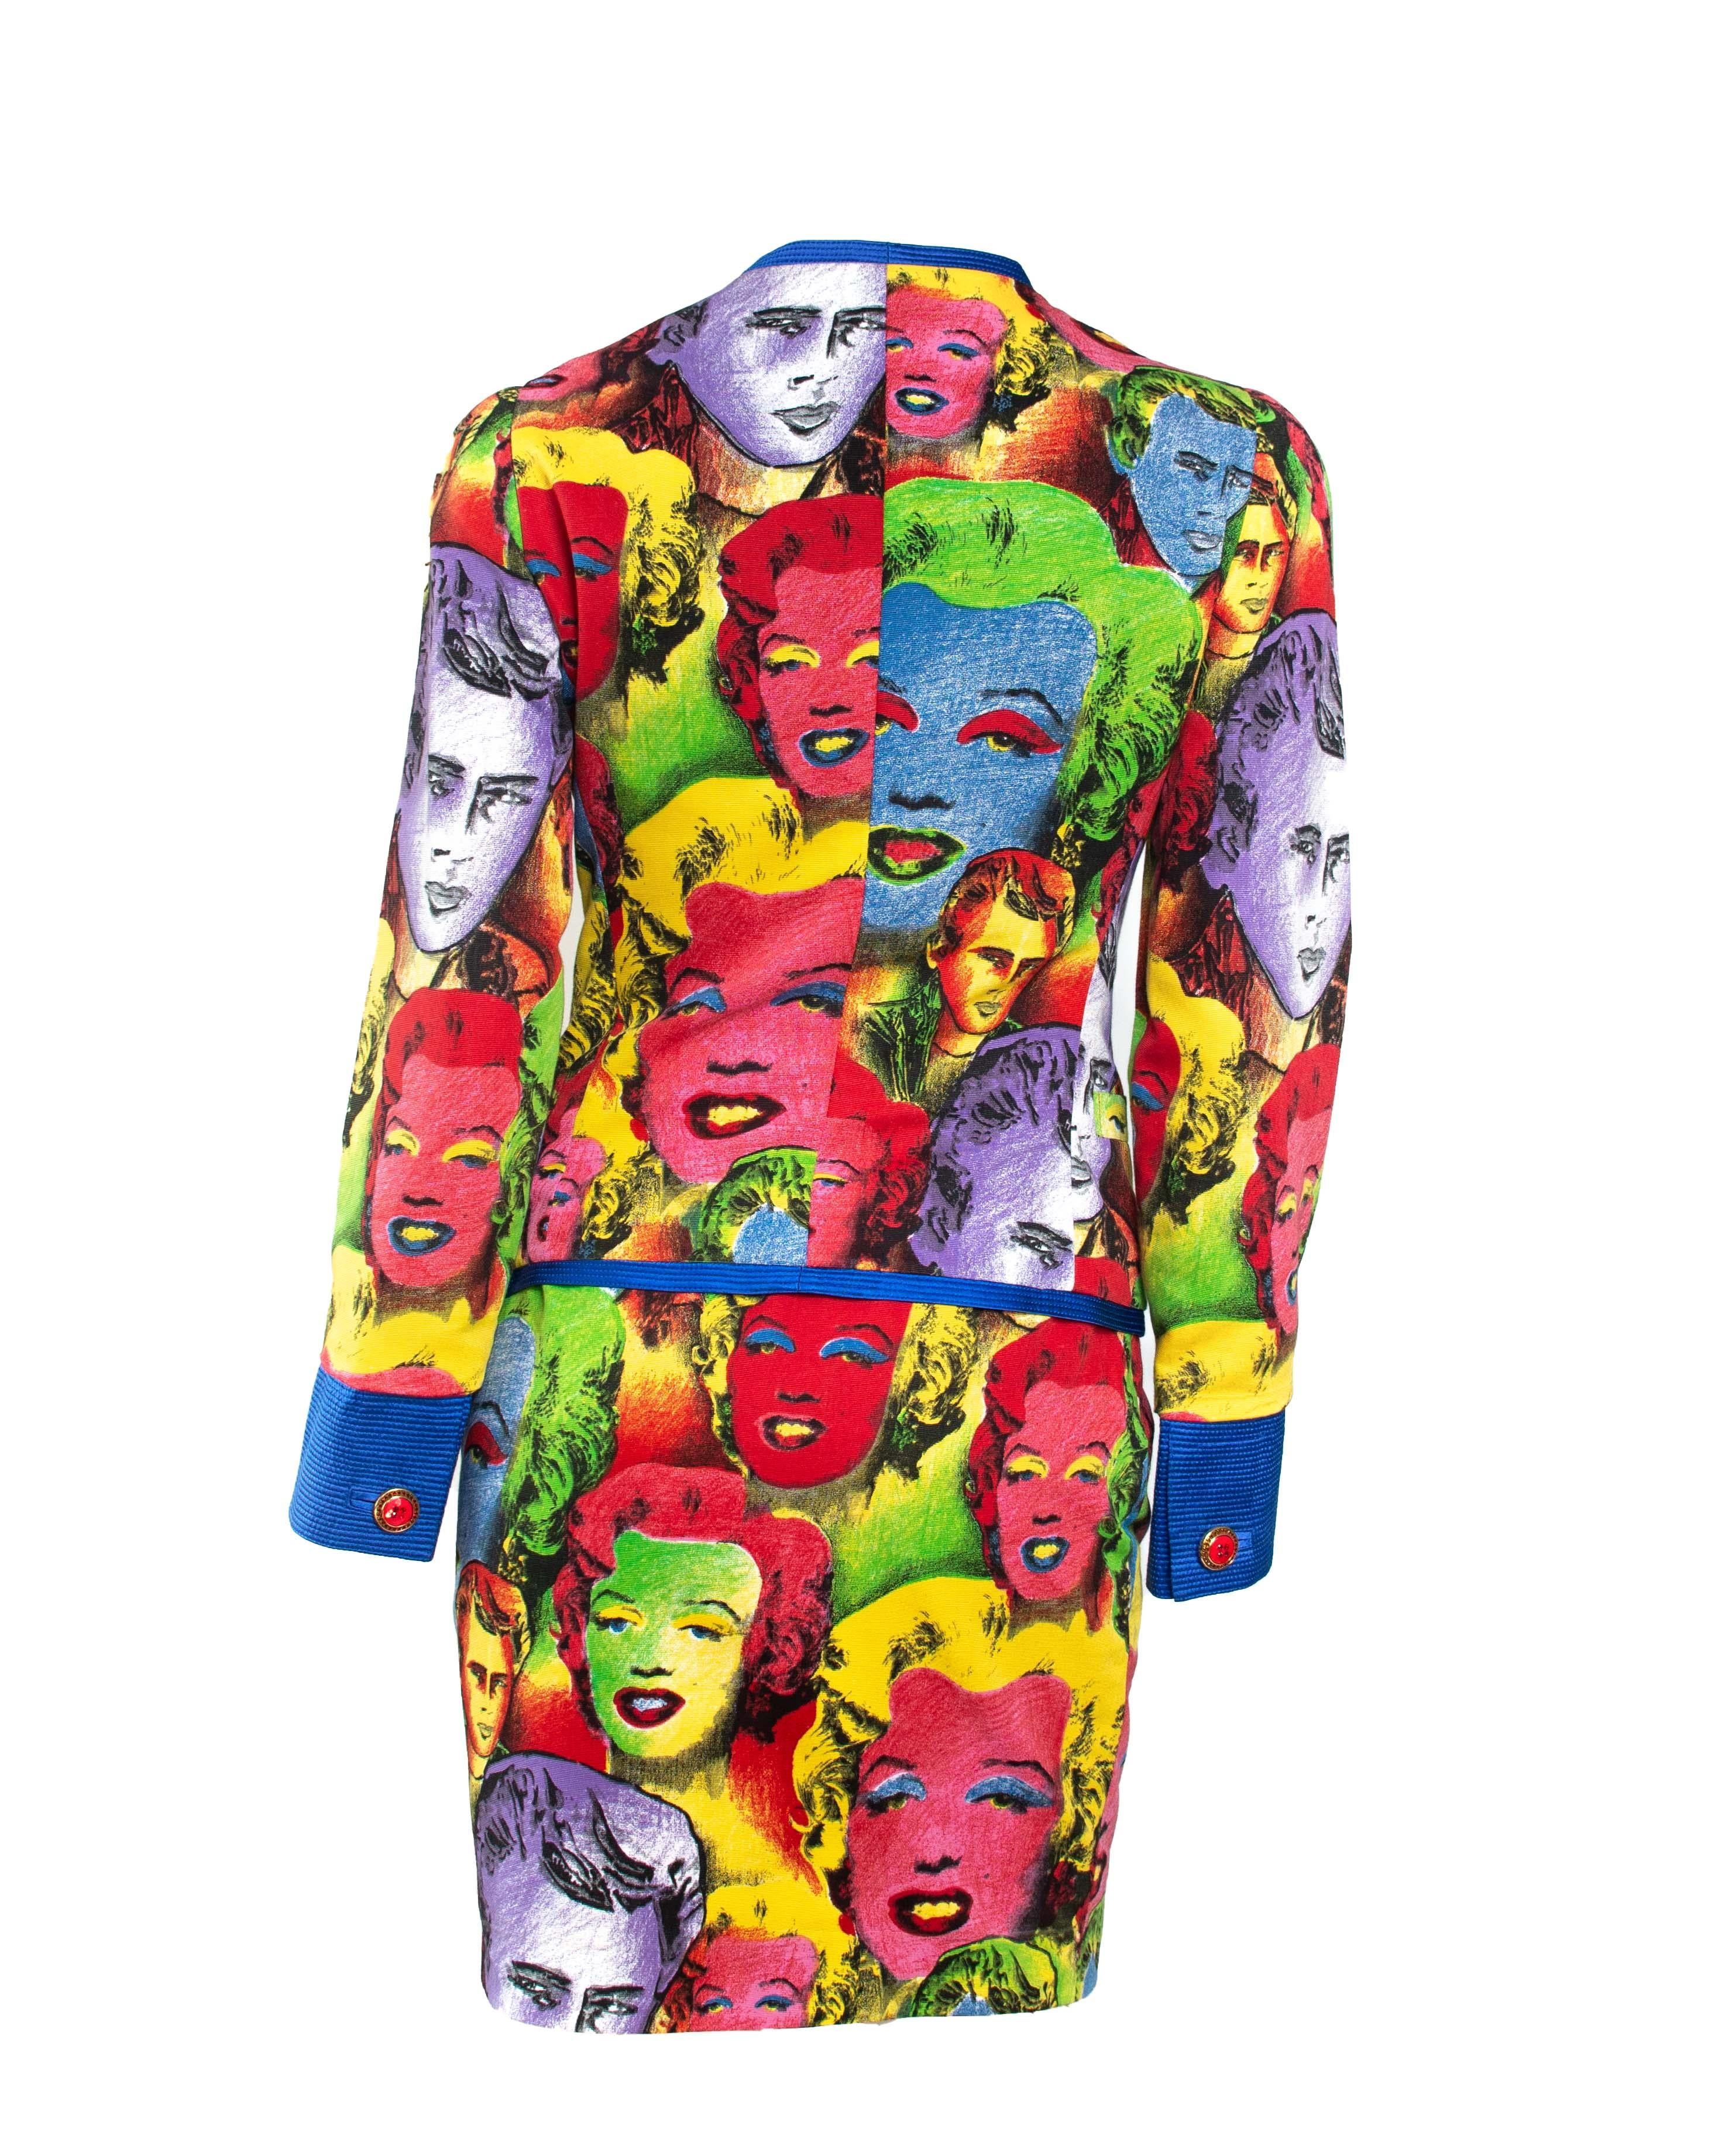 S/S 1991 Gianni Versace Marilyn Monroe Warhol Inspired Print Pop Art Skirt Suit In Good Condition For Sale In West Hollywood, CA